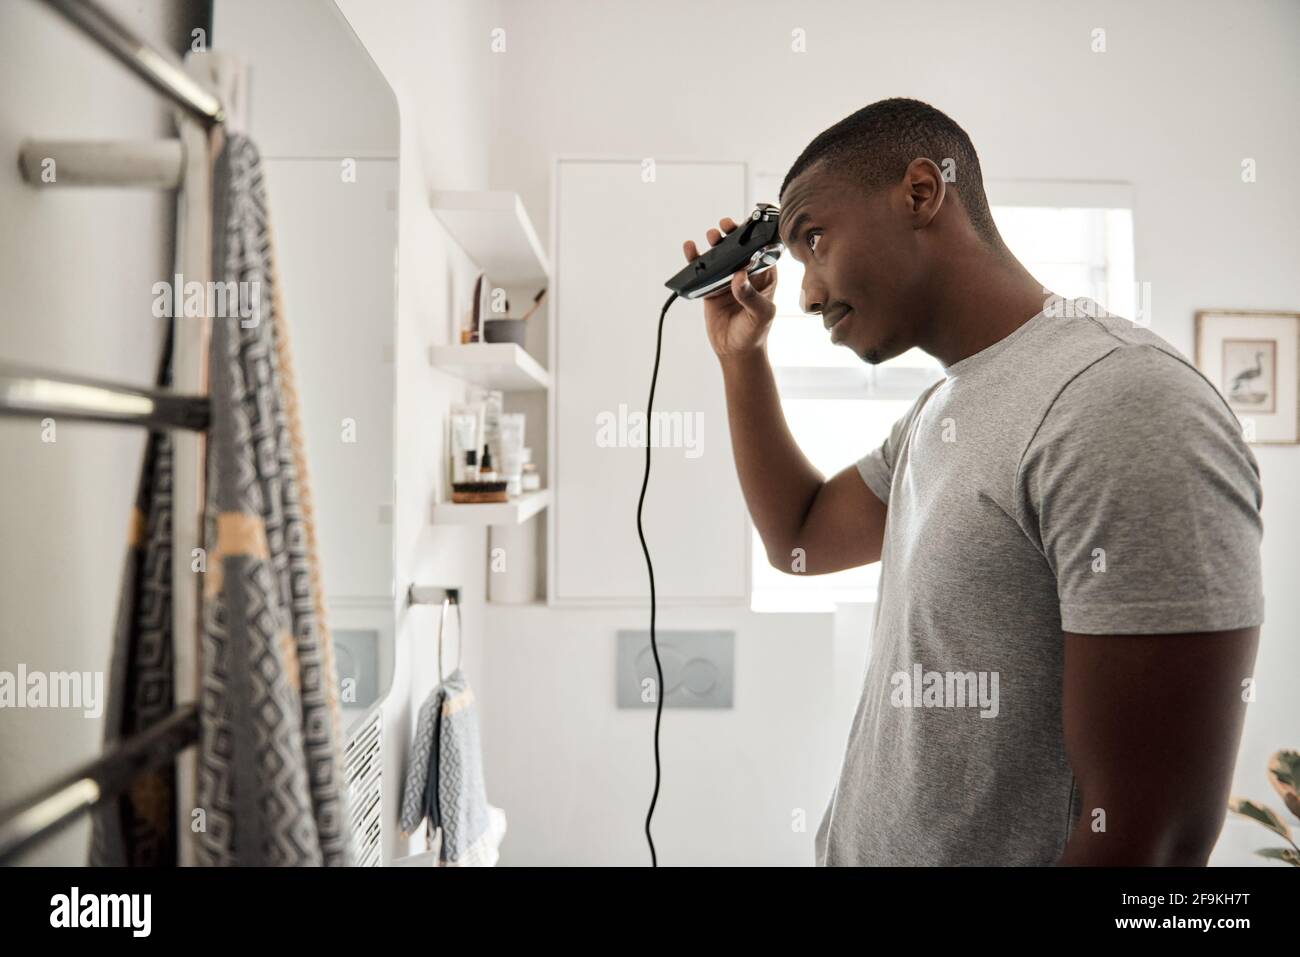 Young African man cutting his hair in his bathroom Stock Photo